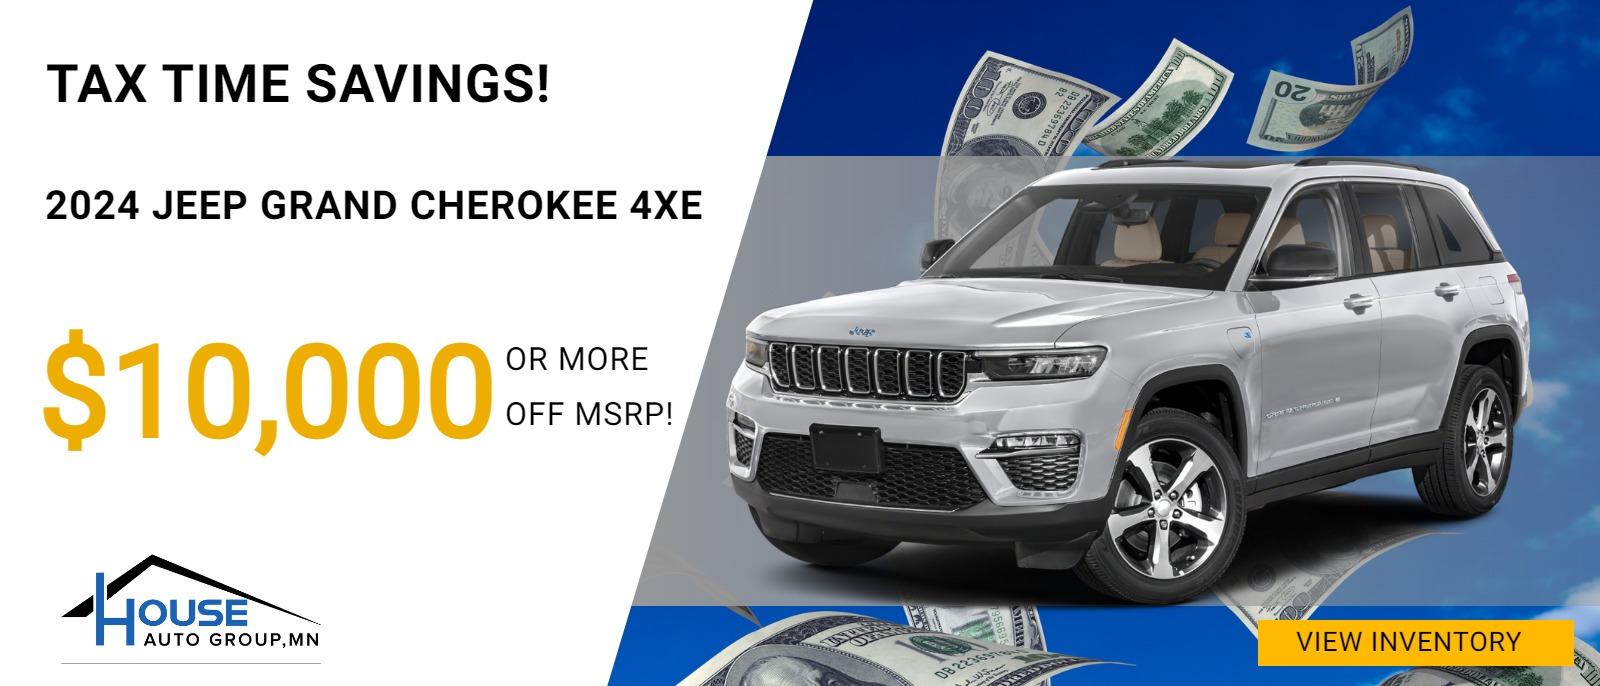 TAX TIME SAVINGS!
2024 Jeep Grand Cherokee 4xe -- $10,000 Or More Off MSRP!